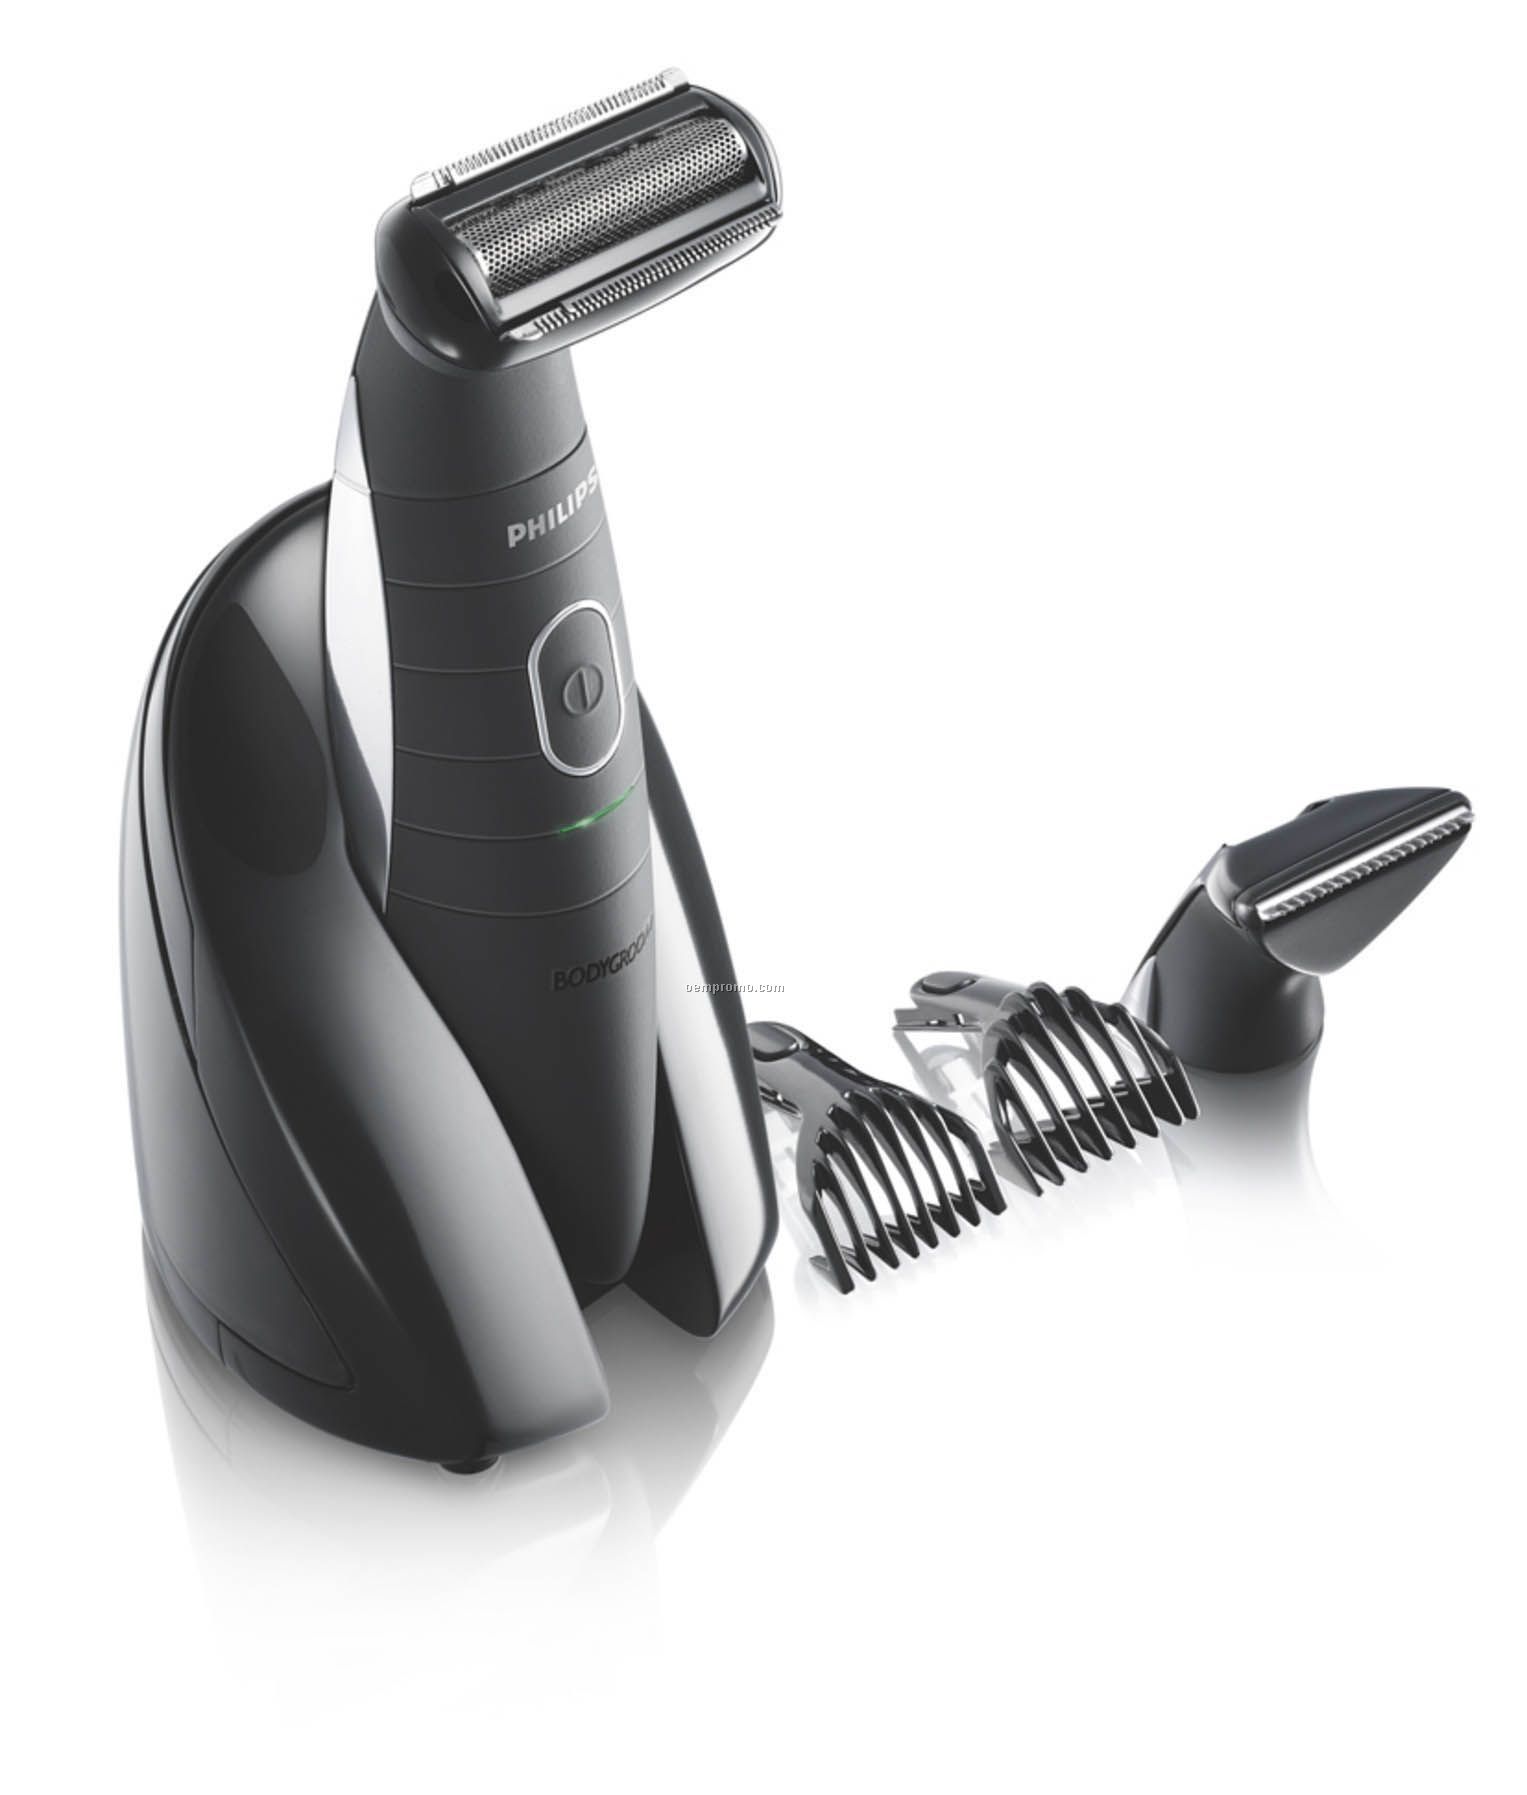 Phillips Norelco Bodygroom System W/ High Performance Trimmer Attachment